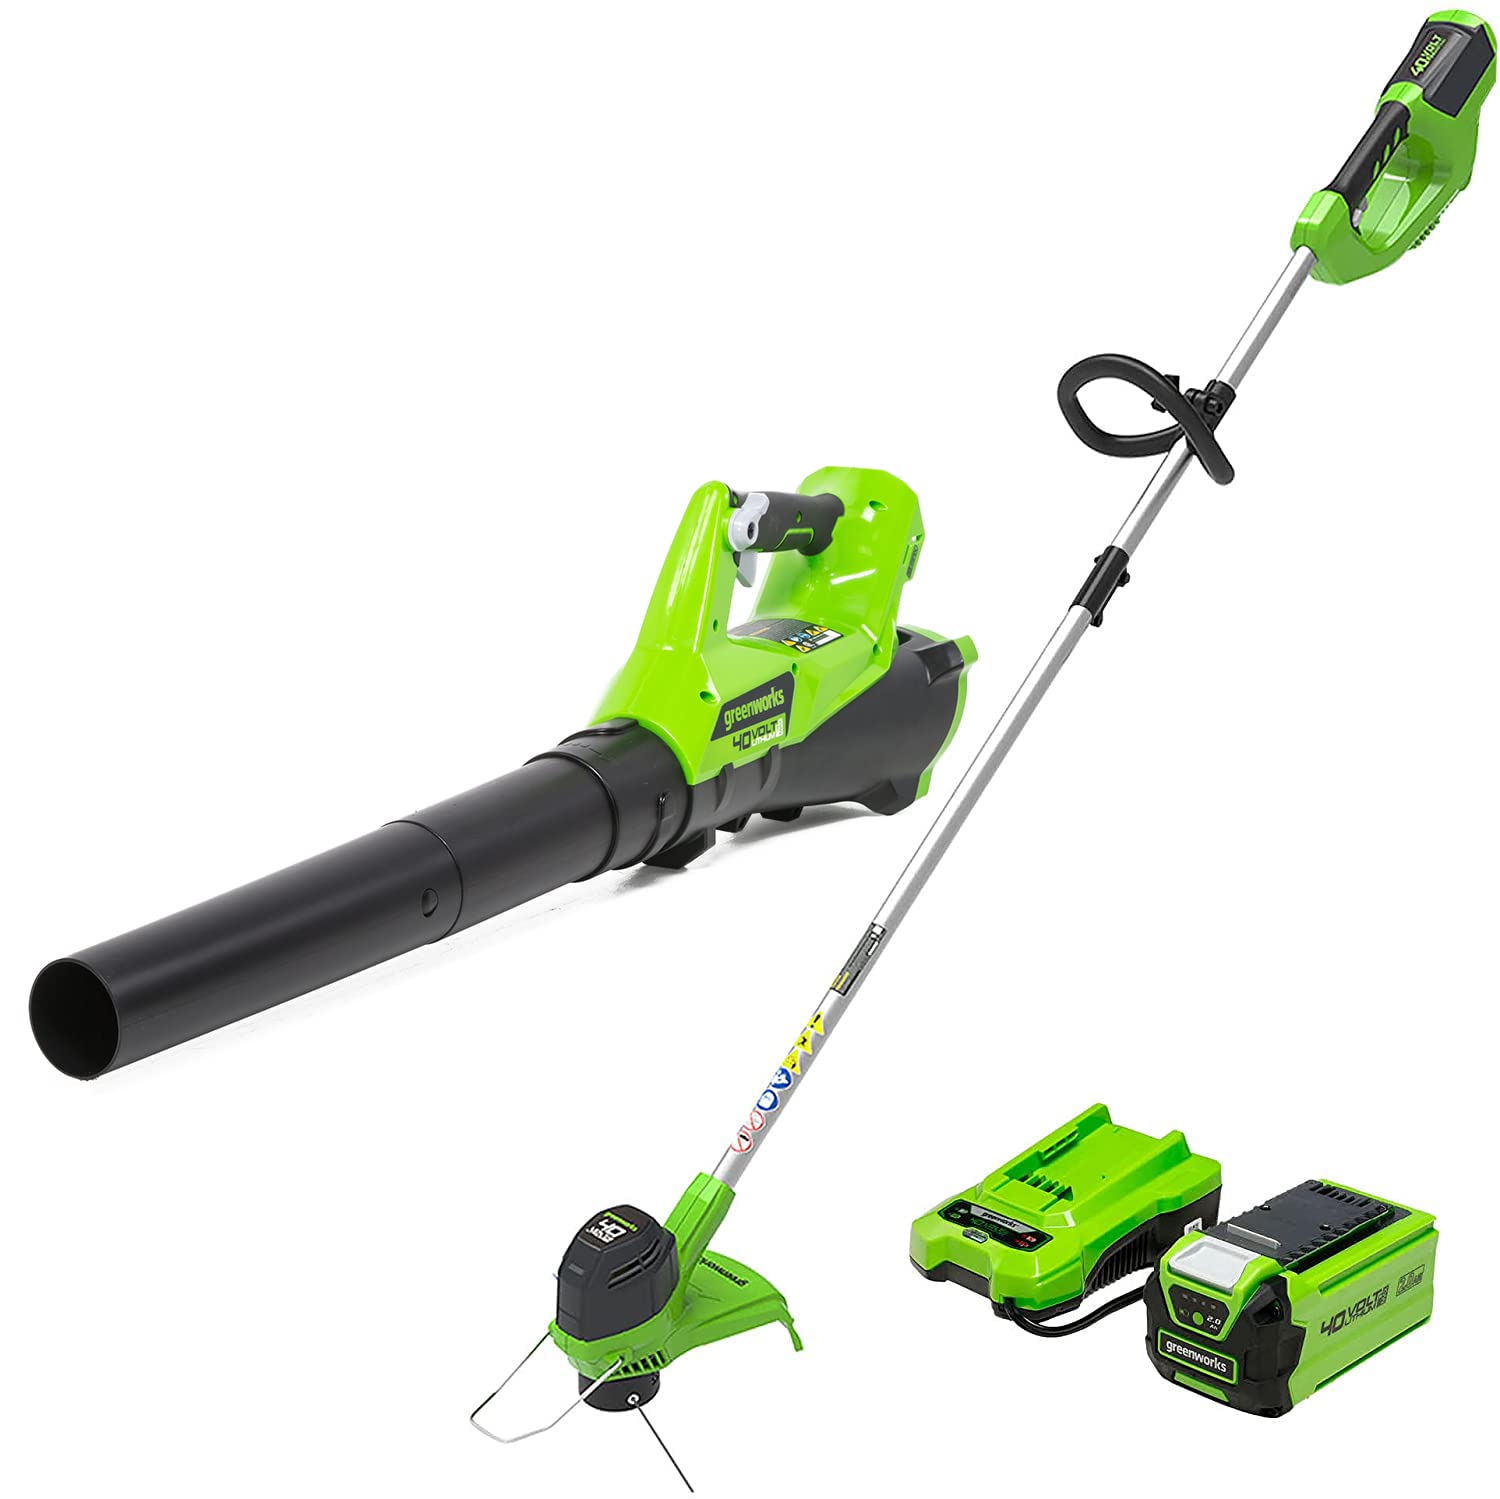 Greenworks 40V Cordless String Trimmer and Leaf Blower Combo Kit, 2.0Ah Battery and Charger Included $94.5